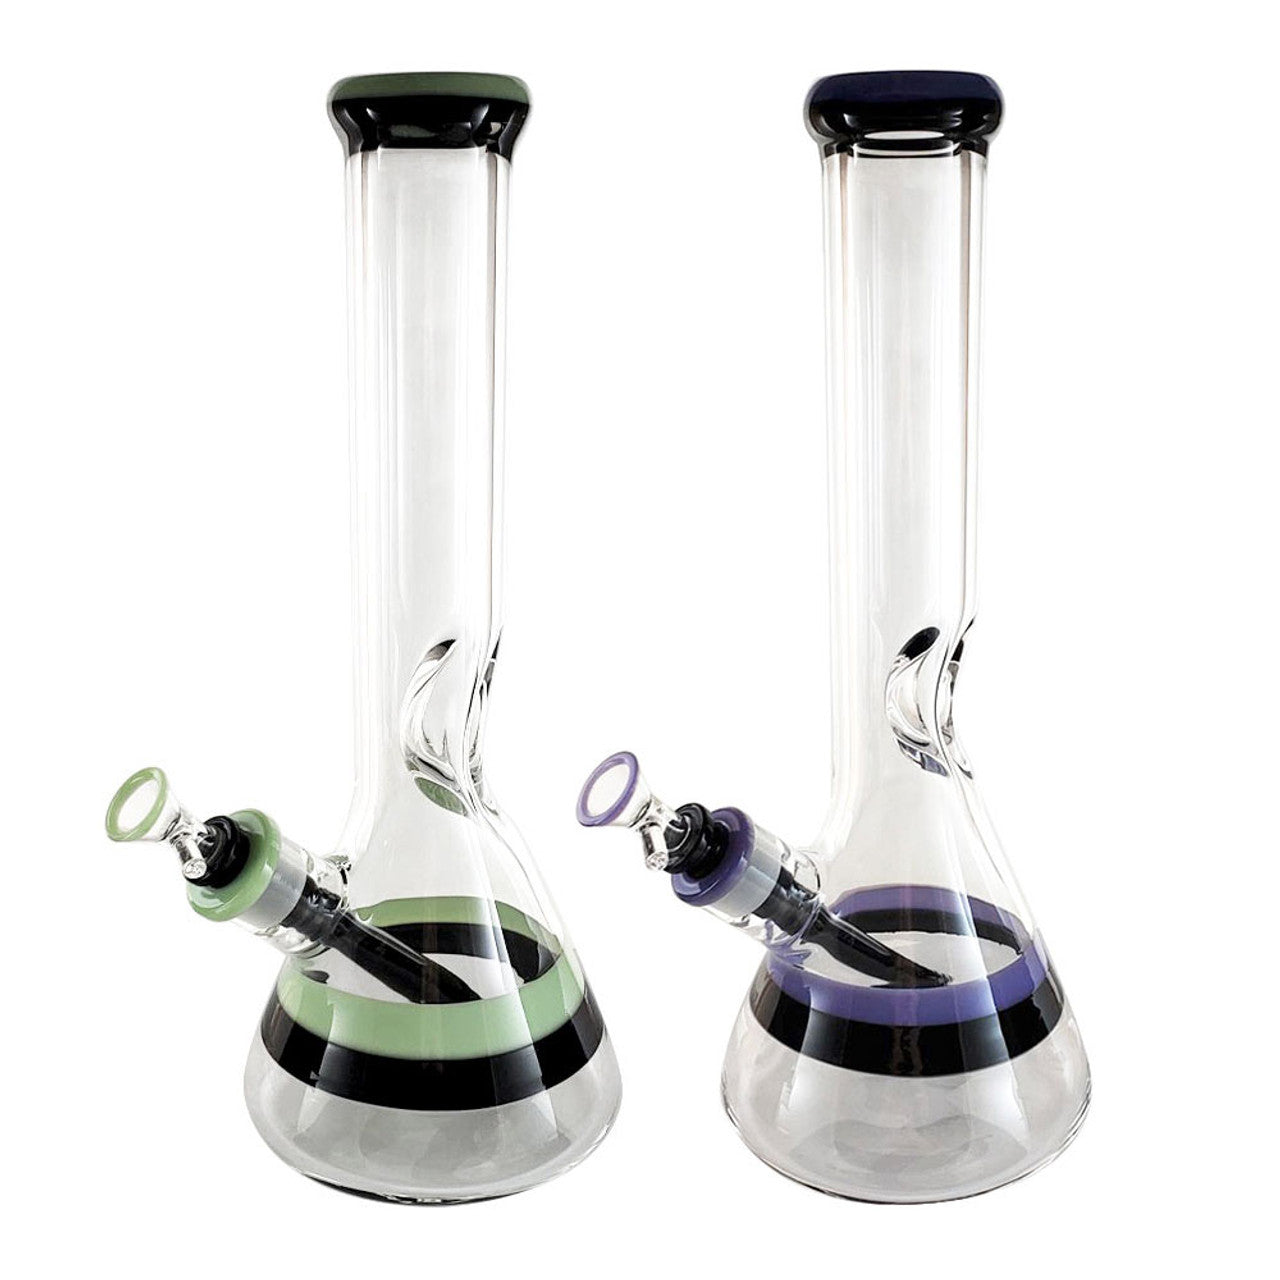 These glass water pipes stand 14 inches tall and features assorted colour accents. These beakers have a built-in 3-pinch ice catcher which makes for cooler, smoother hits. Includes a matching 14mm glass herb slide and removable plastic downstem. Sold in assorted colours that may vary from images.